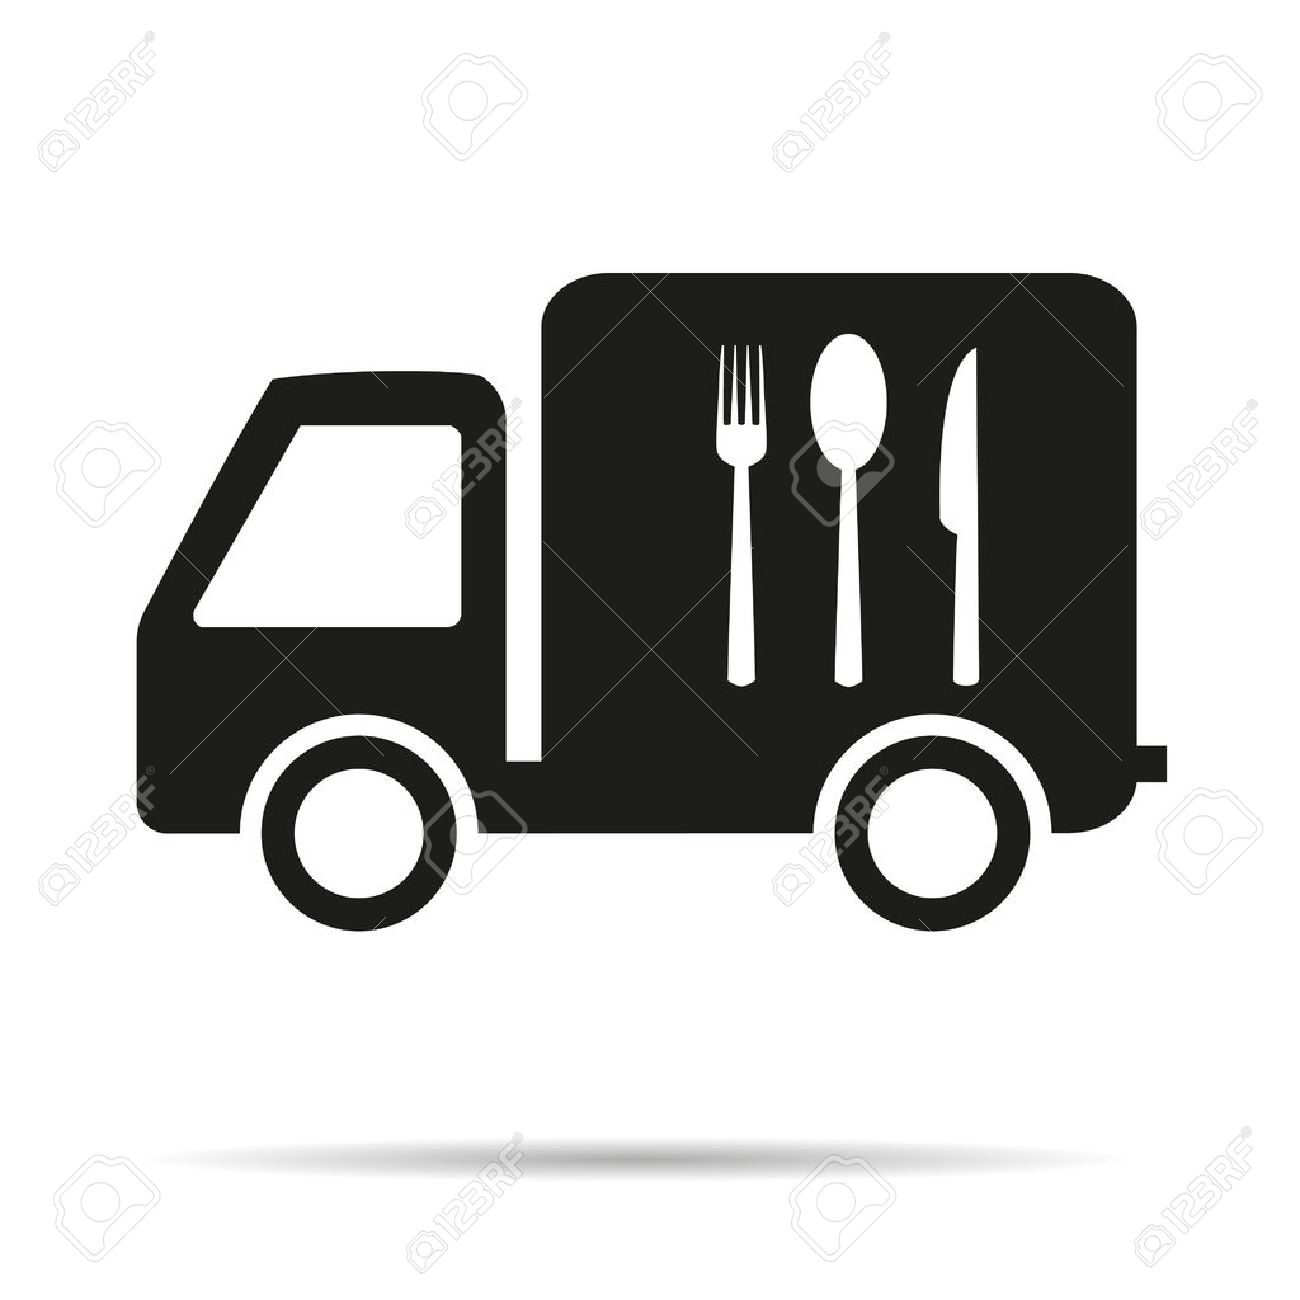 Food Delivery Icon Free Vector Art - (35387 Free Downloads)